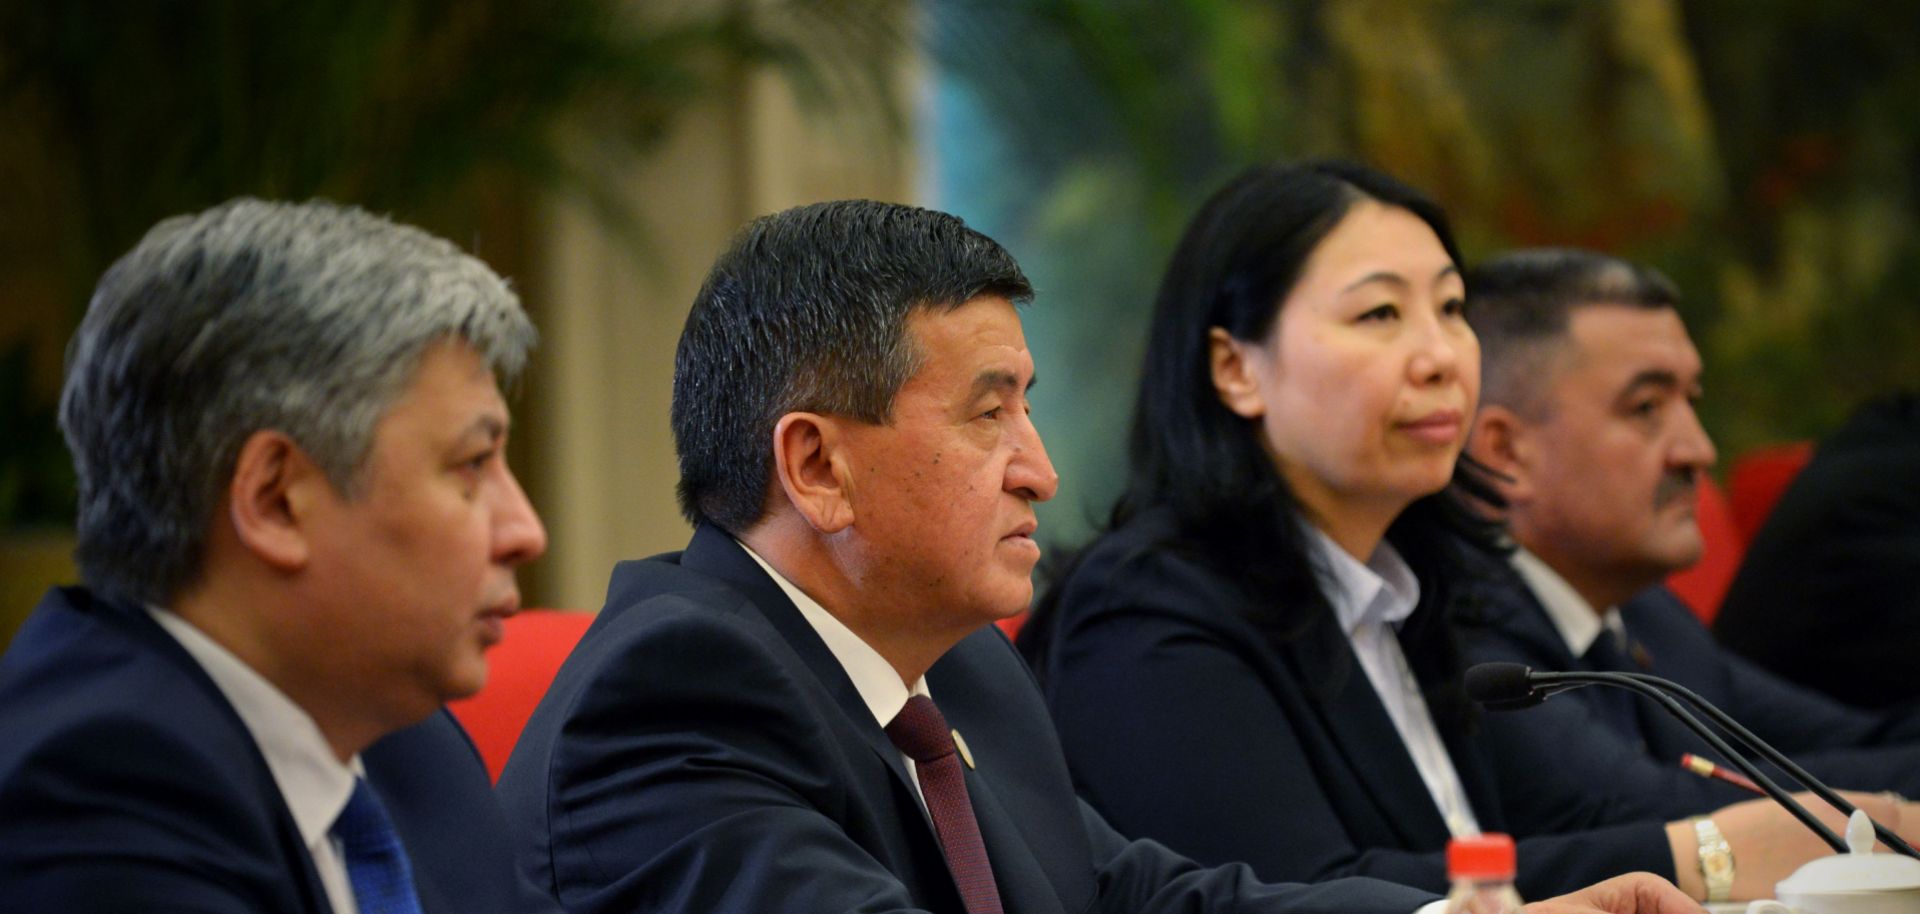 Former Kyrgyz Prime Minister Sooronbay Jeenbekov (second from the left)  won his country's presidential election on Oct. 15.